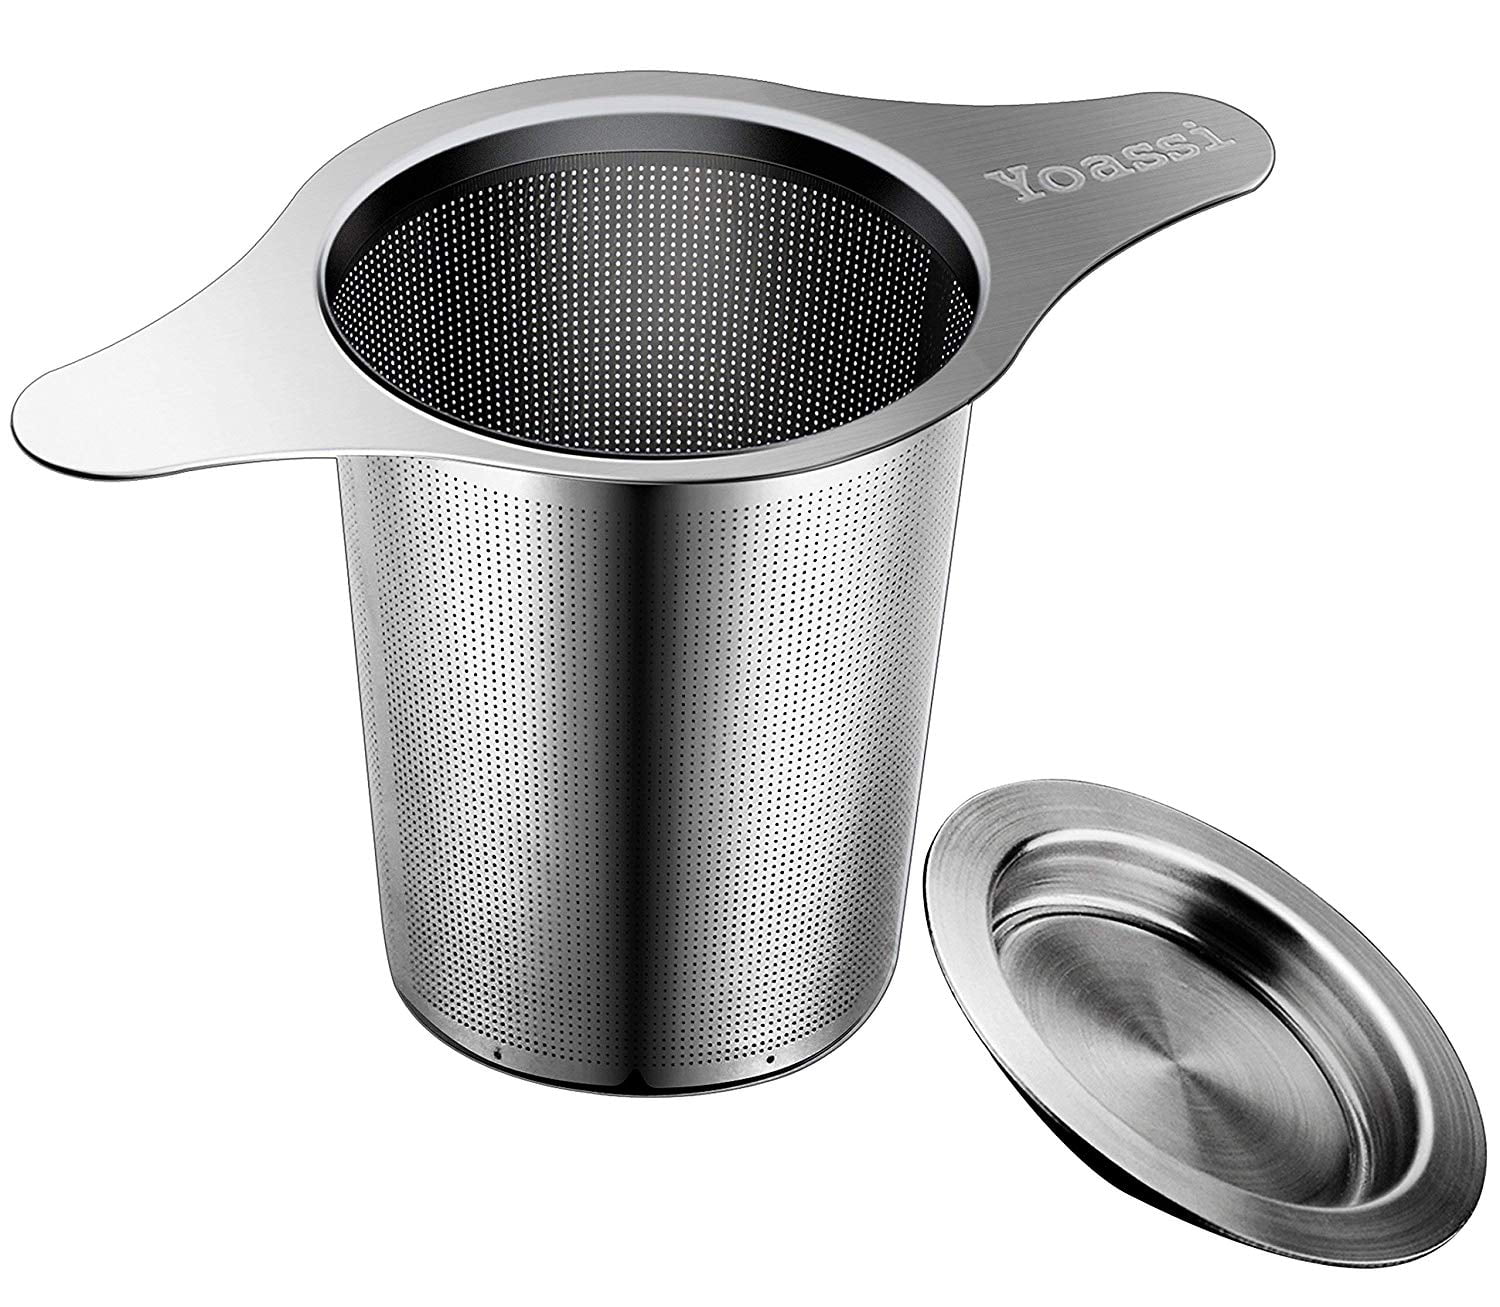 Mugs Cups to Steep Loose Leaf Tea and Coffee Tea Infuser 304 Stainless Steel Teapot Mesh Strainer Double Handles Coffee Filter with lid Hanging on Teapots